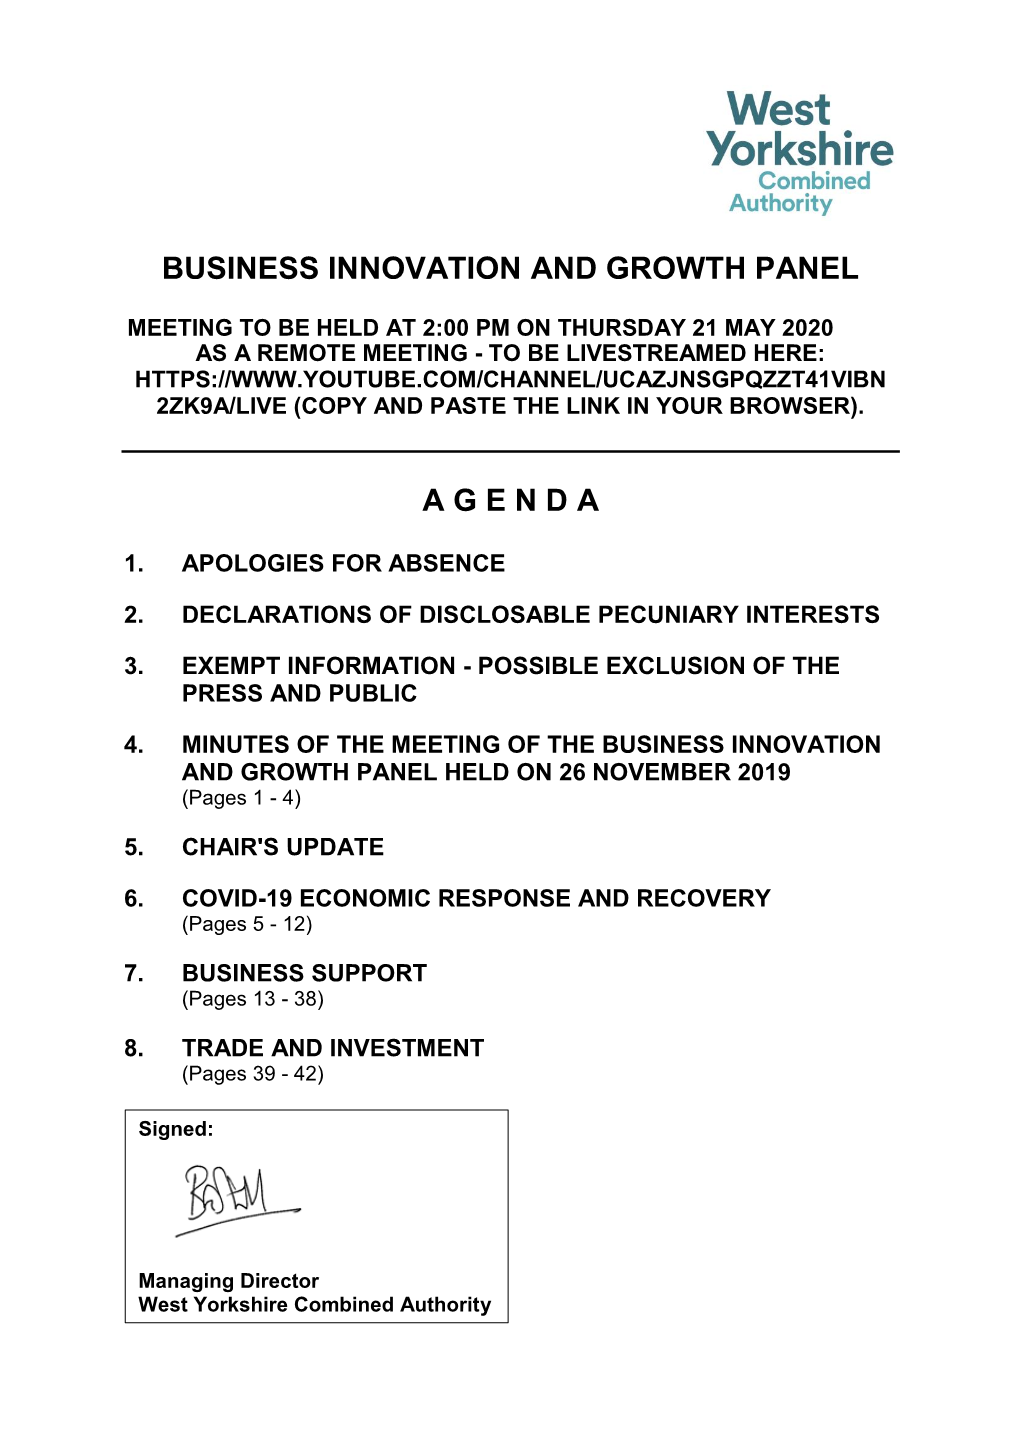 Business Innovation and Growth Panel